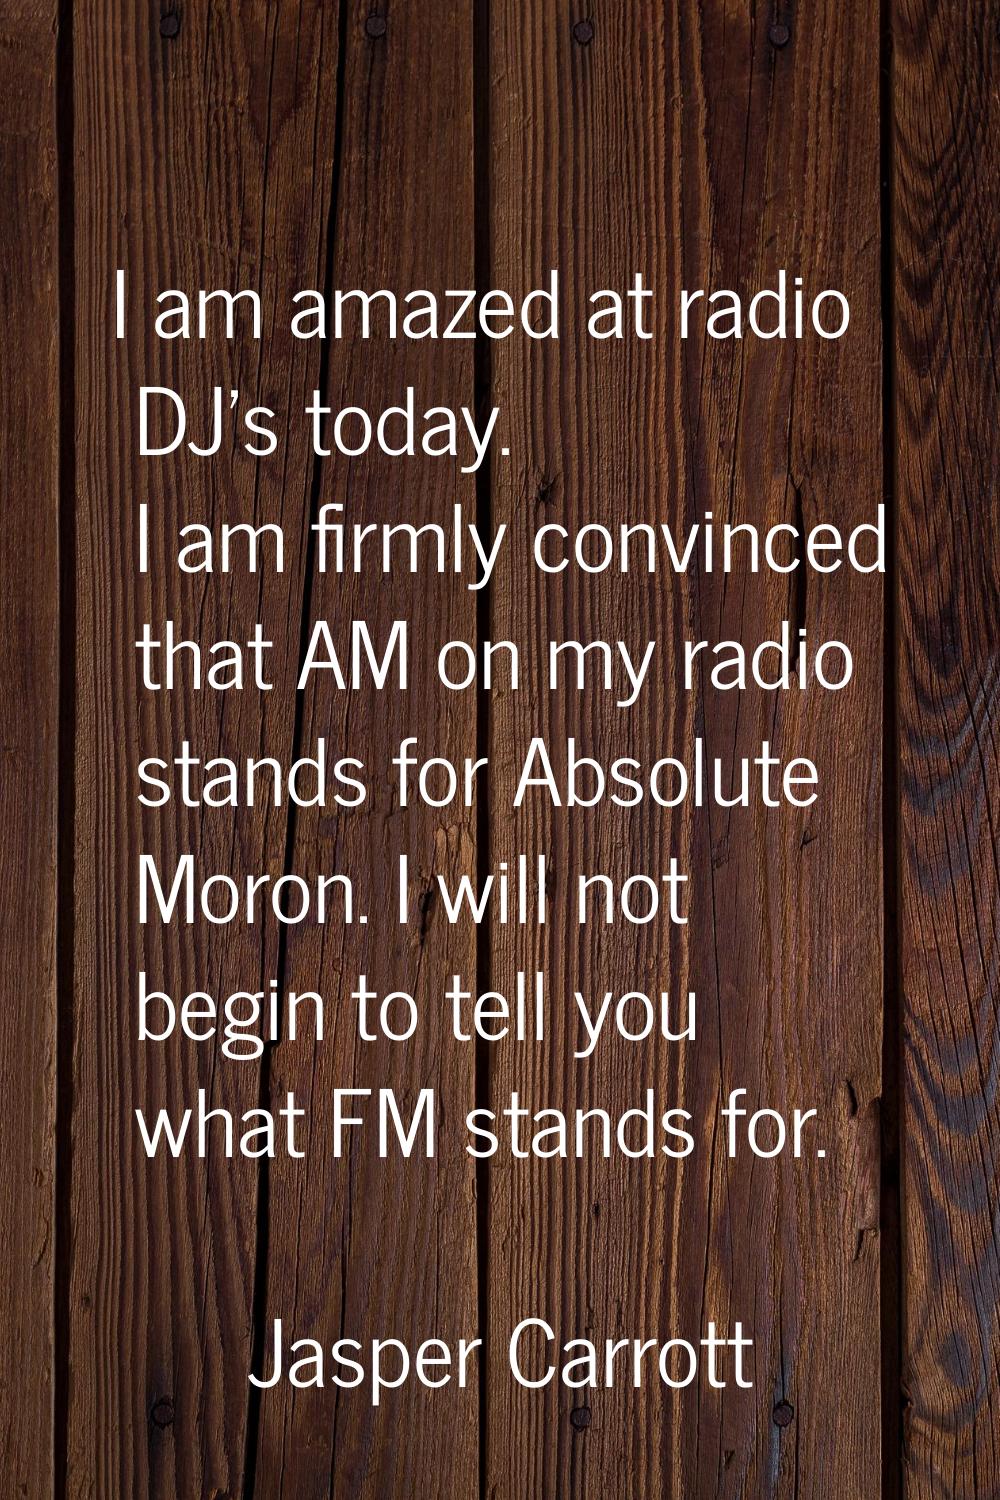 I am amazed at radio DJ's today. I am firmly convinced that AM on my radio stands for Absolute Moro